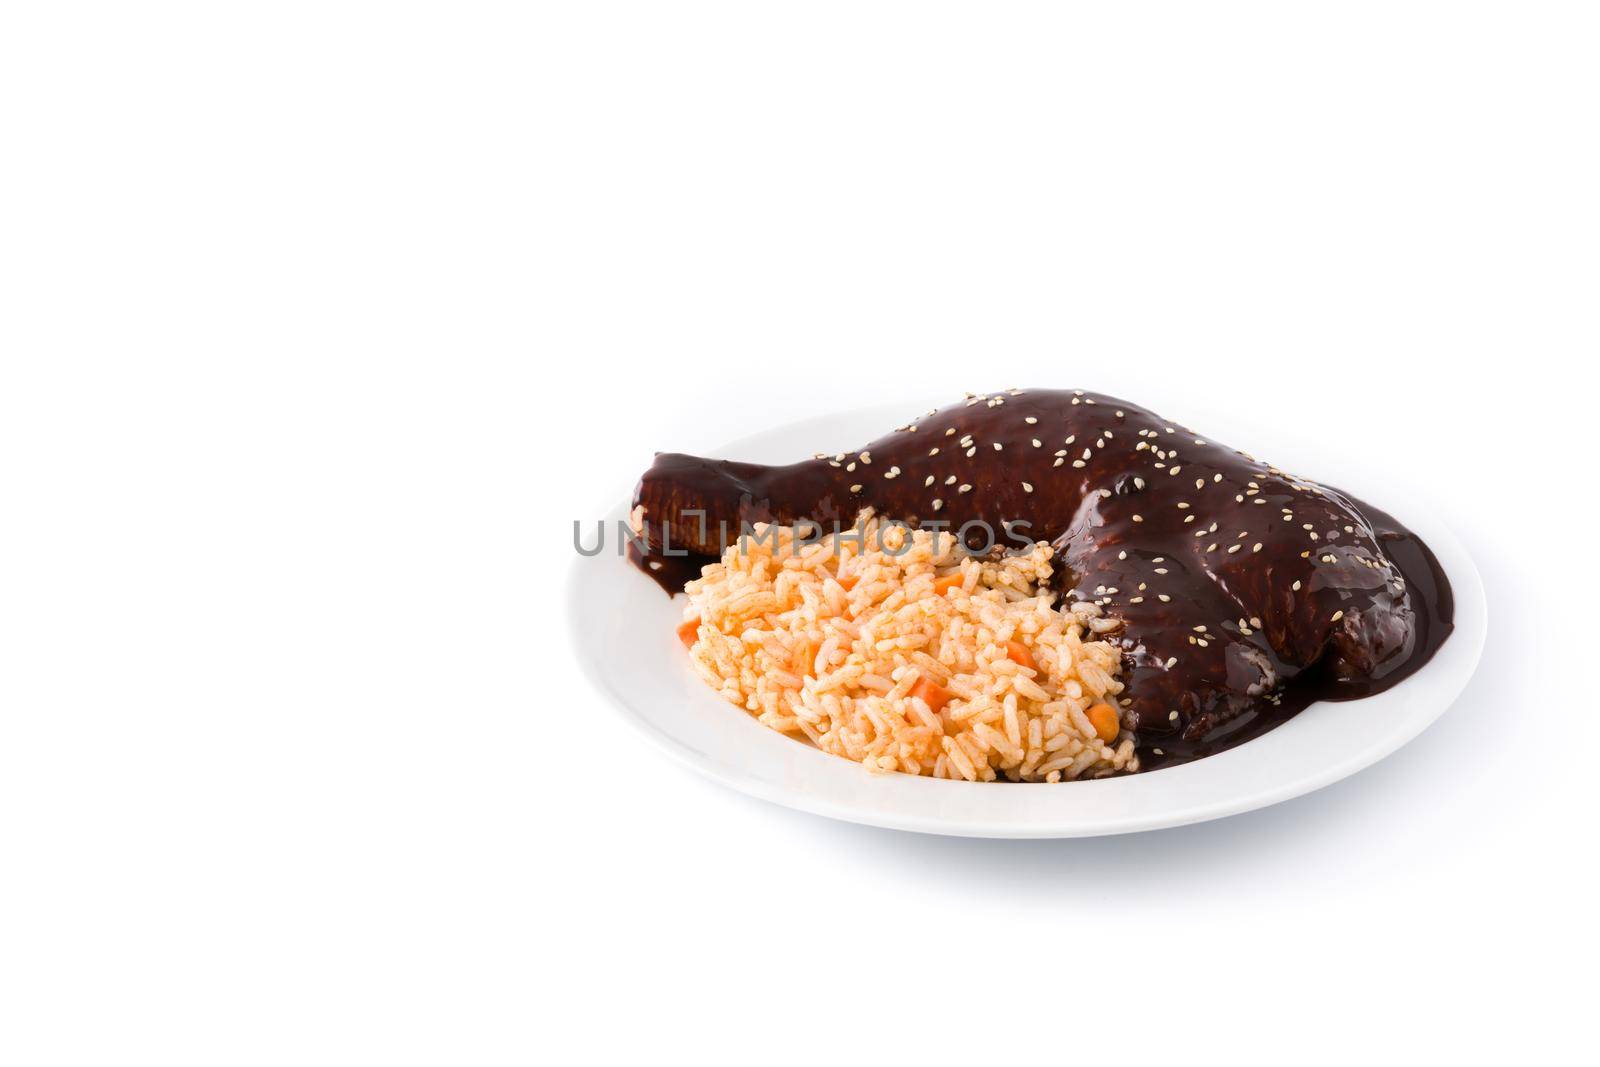 Traditional mole Poblano with rice plate by chandlervid85